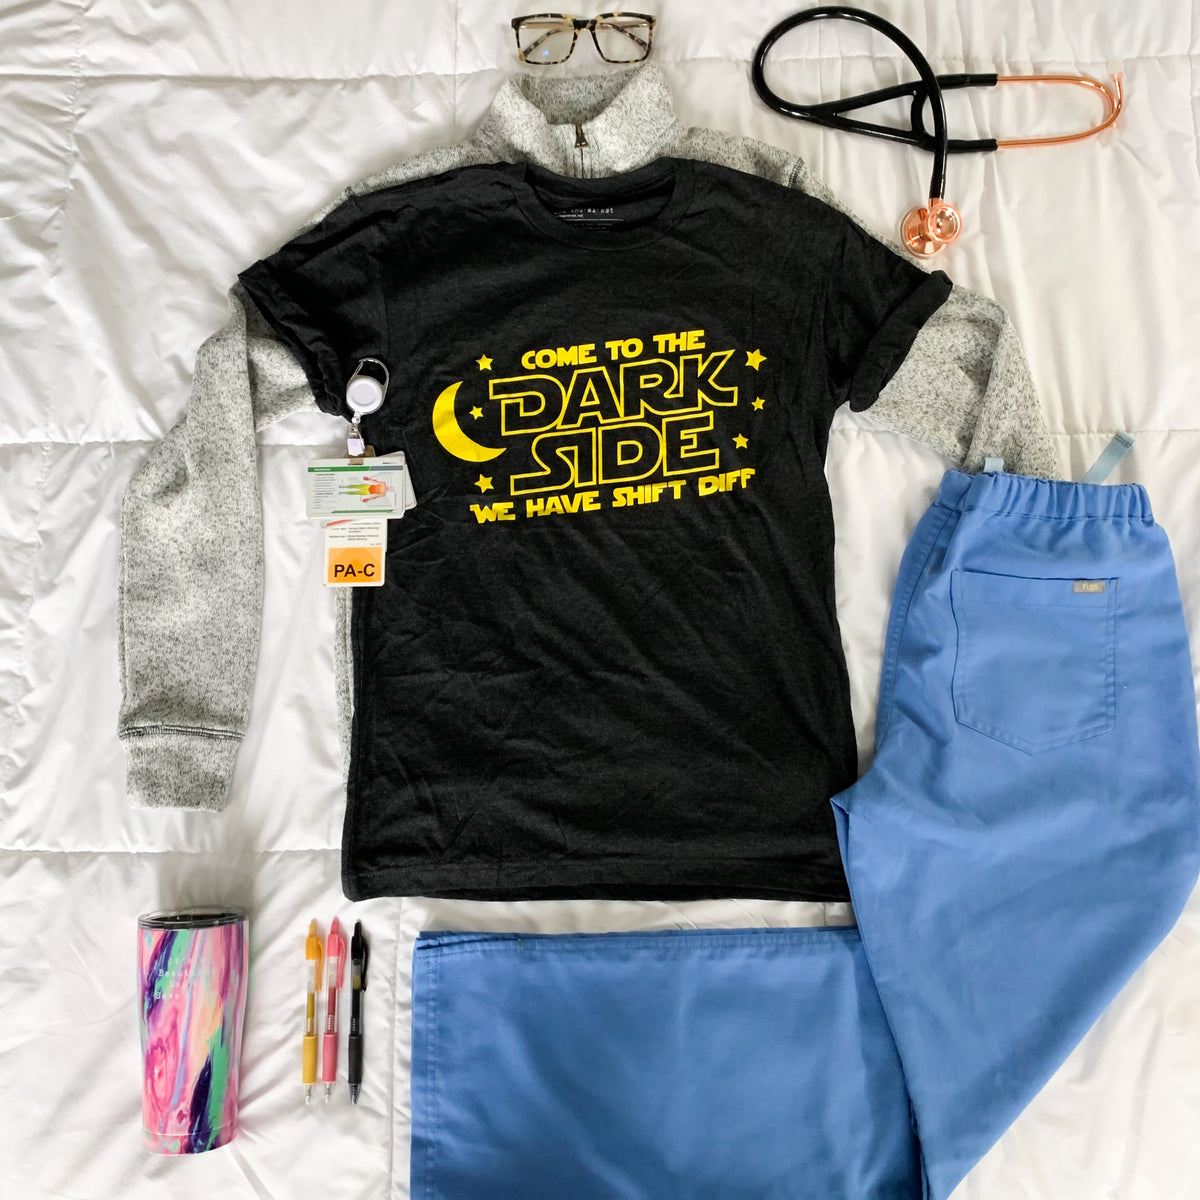 Come to the Dark Side Tee